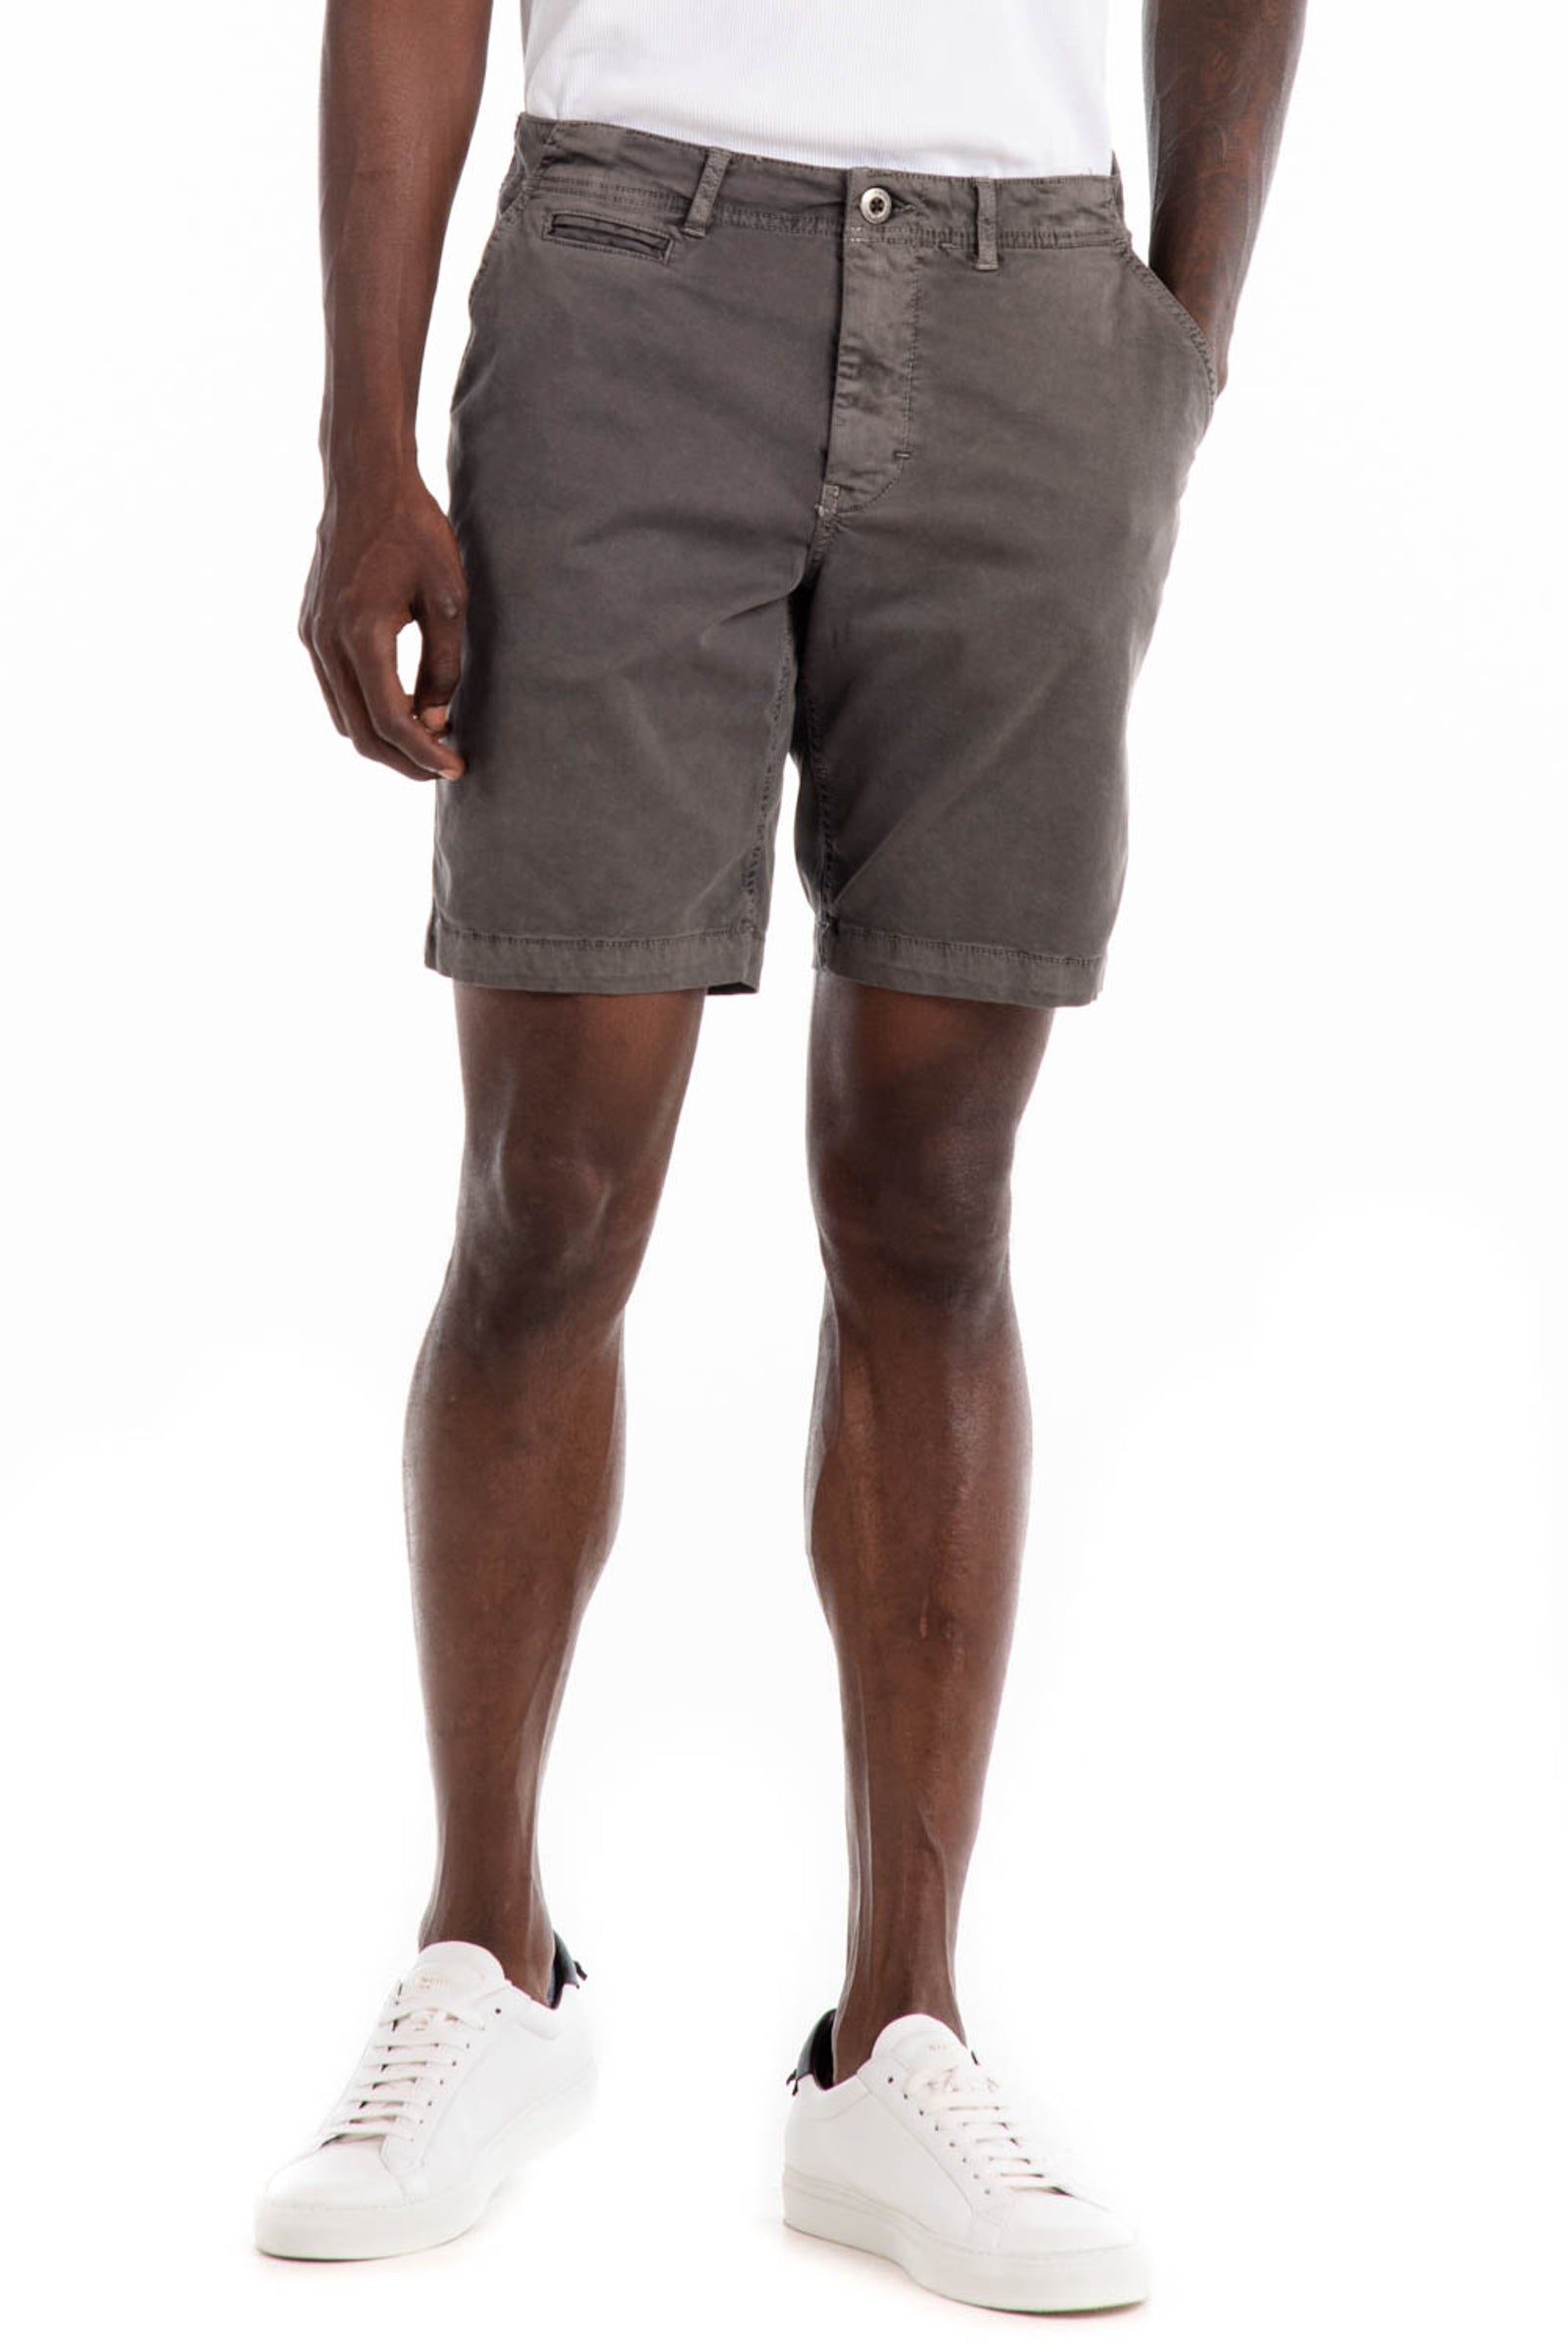 Original Paperbacks Walden Chino Short in Fog on Model Cropped Styled View